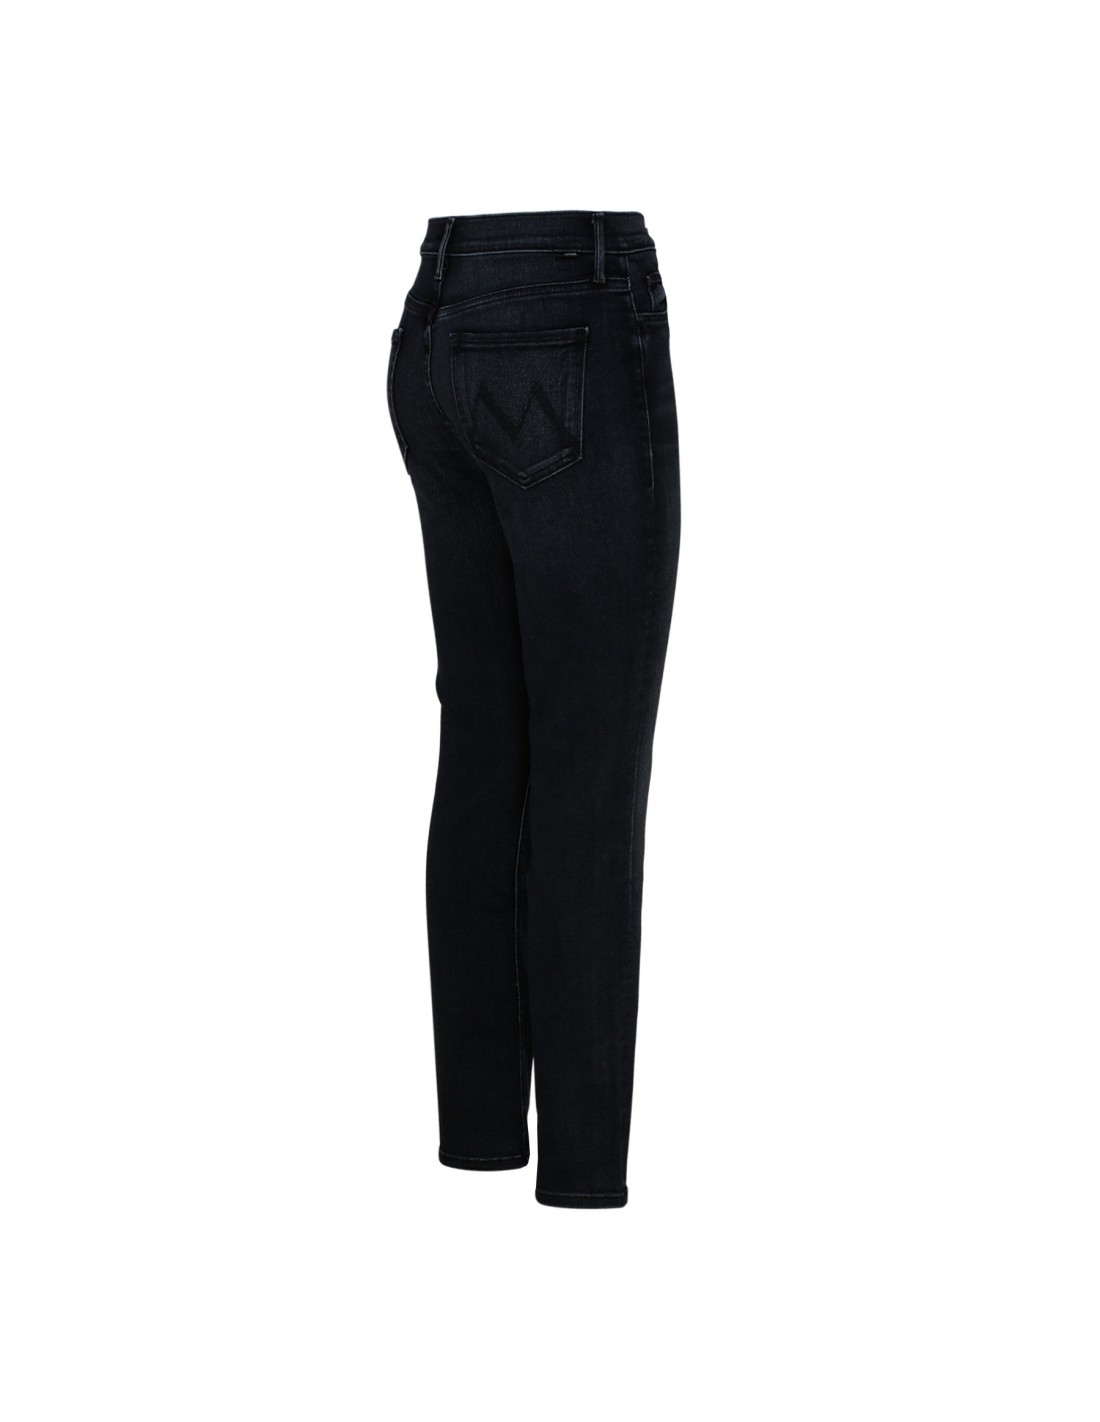 The Mid Rise Dazzler Ankle jeans